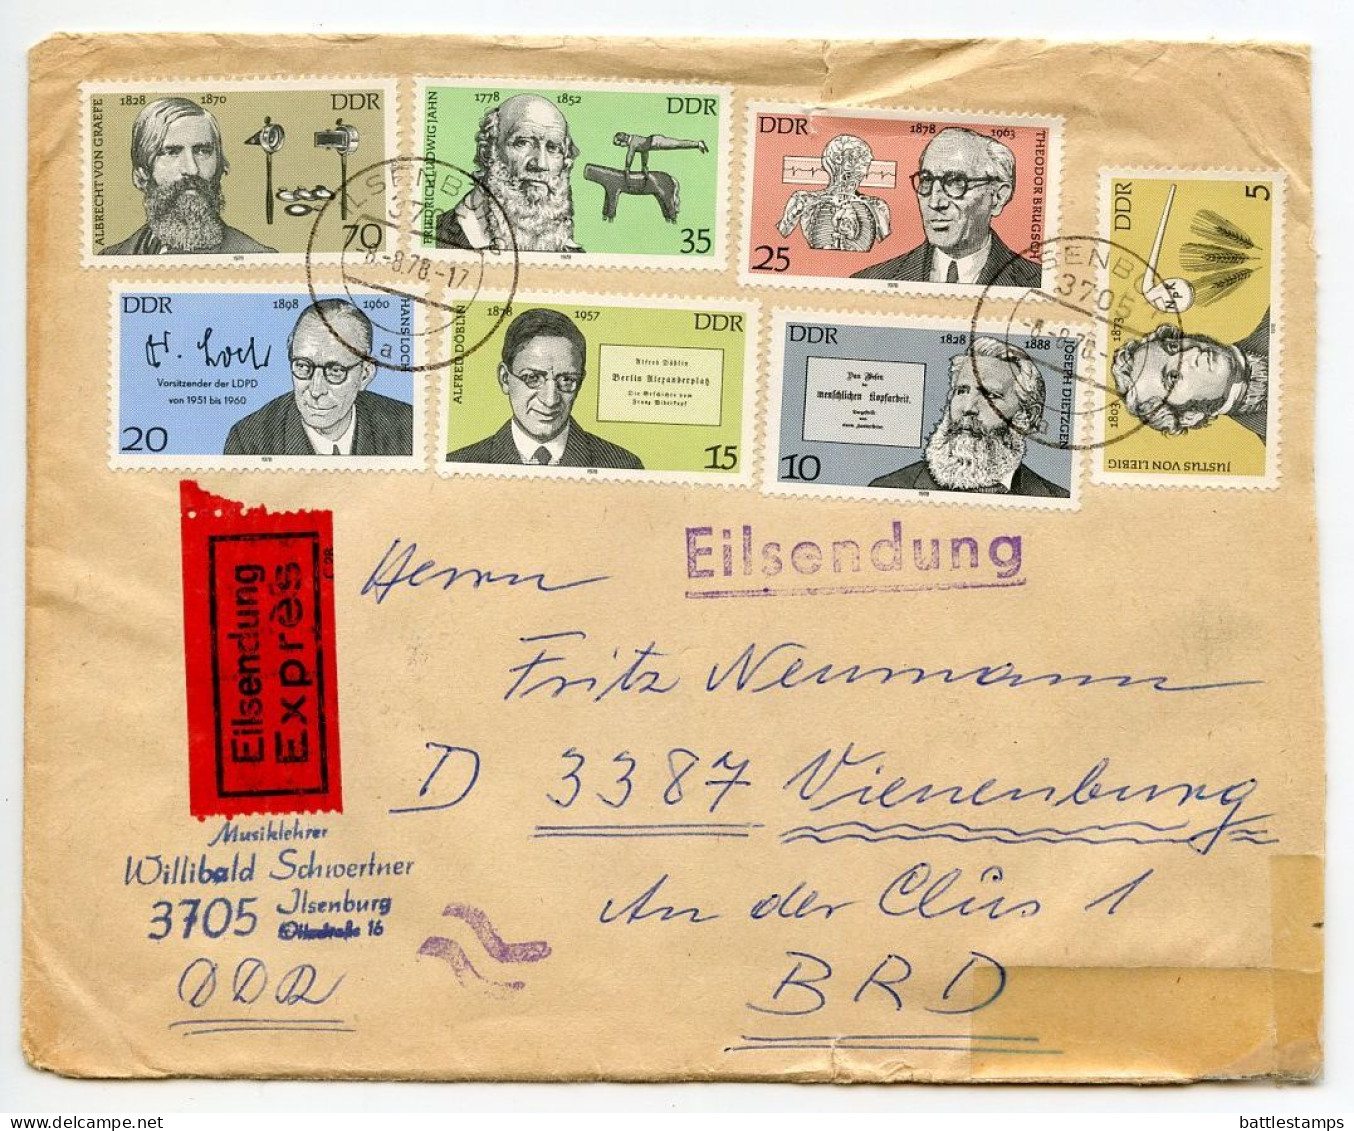 Germany, East 1978 Express Cover; Ilsenburg To Vienenburg; Famous Germans Stamps, Full Set - Covers & Documents